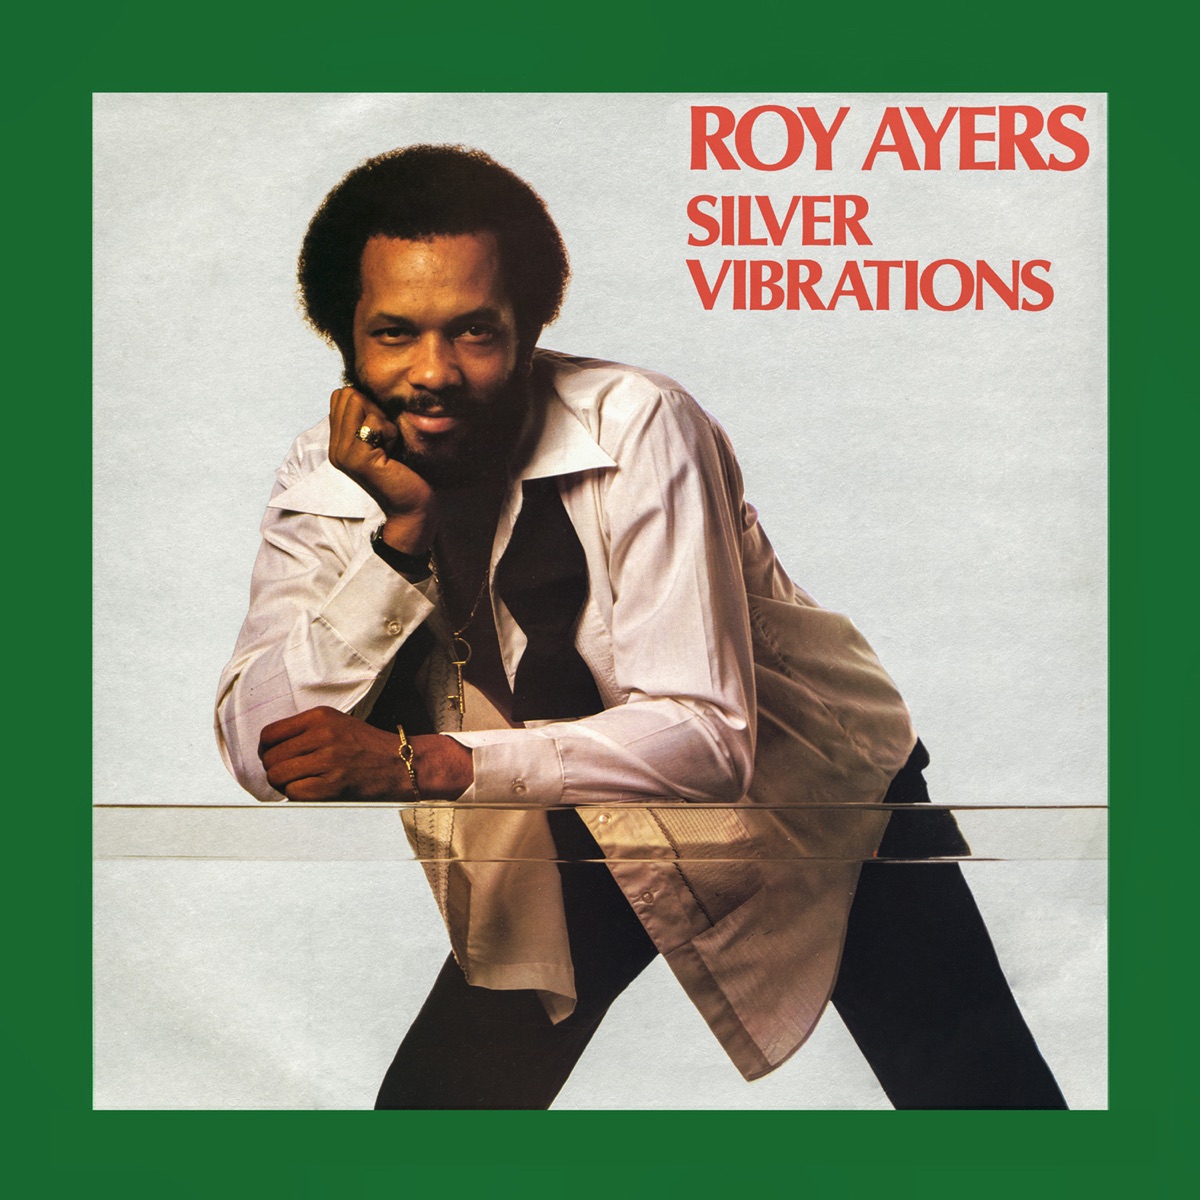 Roy Ayers - You Send Me 